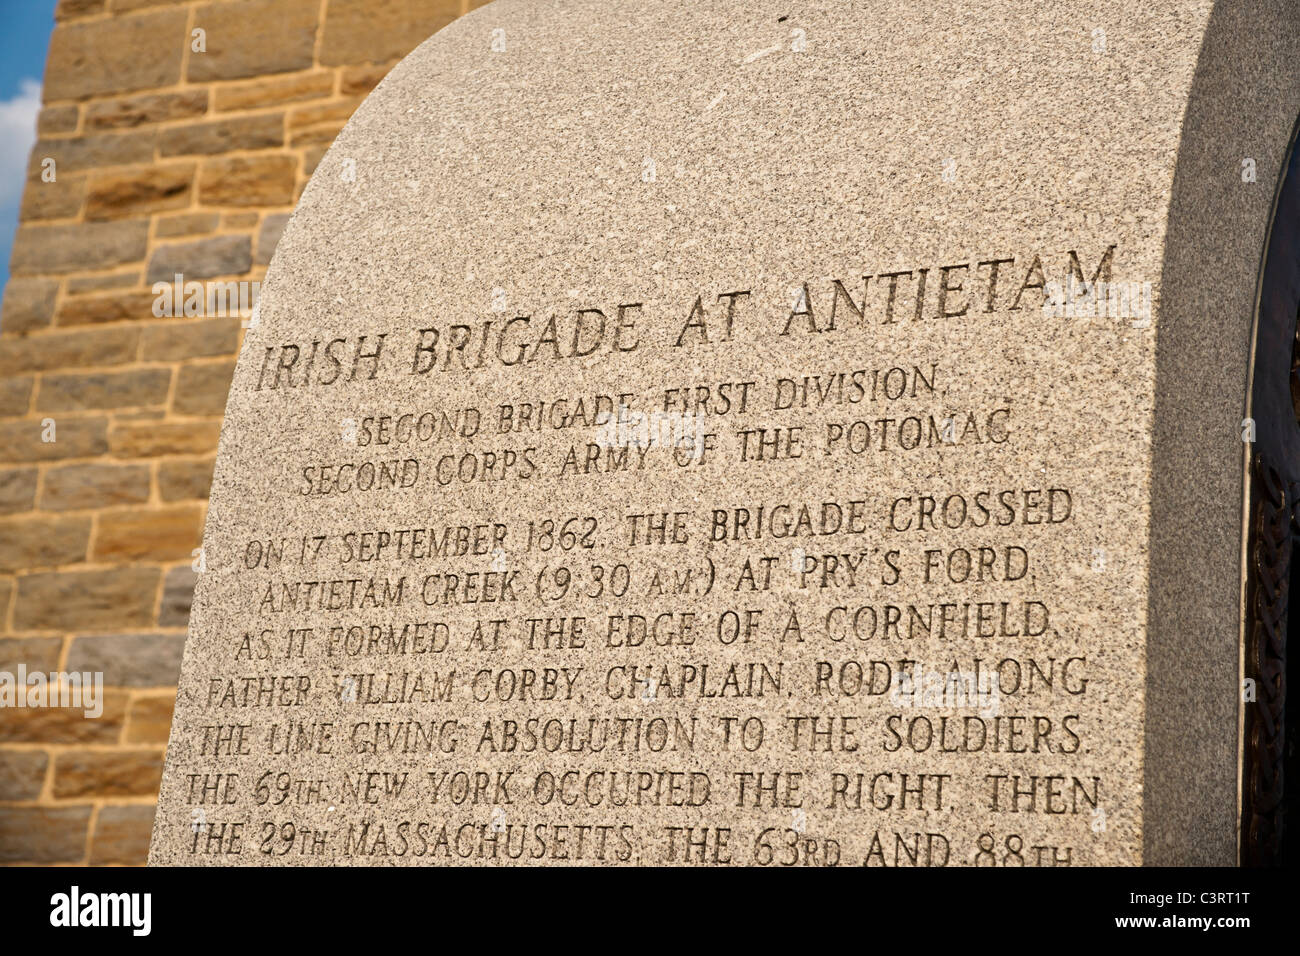 Detail of inscription on the Irish Brigade Monument by Observation Tower overlooking Bloody Lane, Antietam National Battlefield. Stock Photo